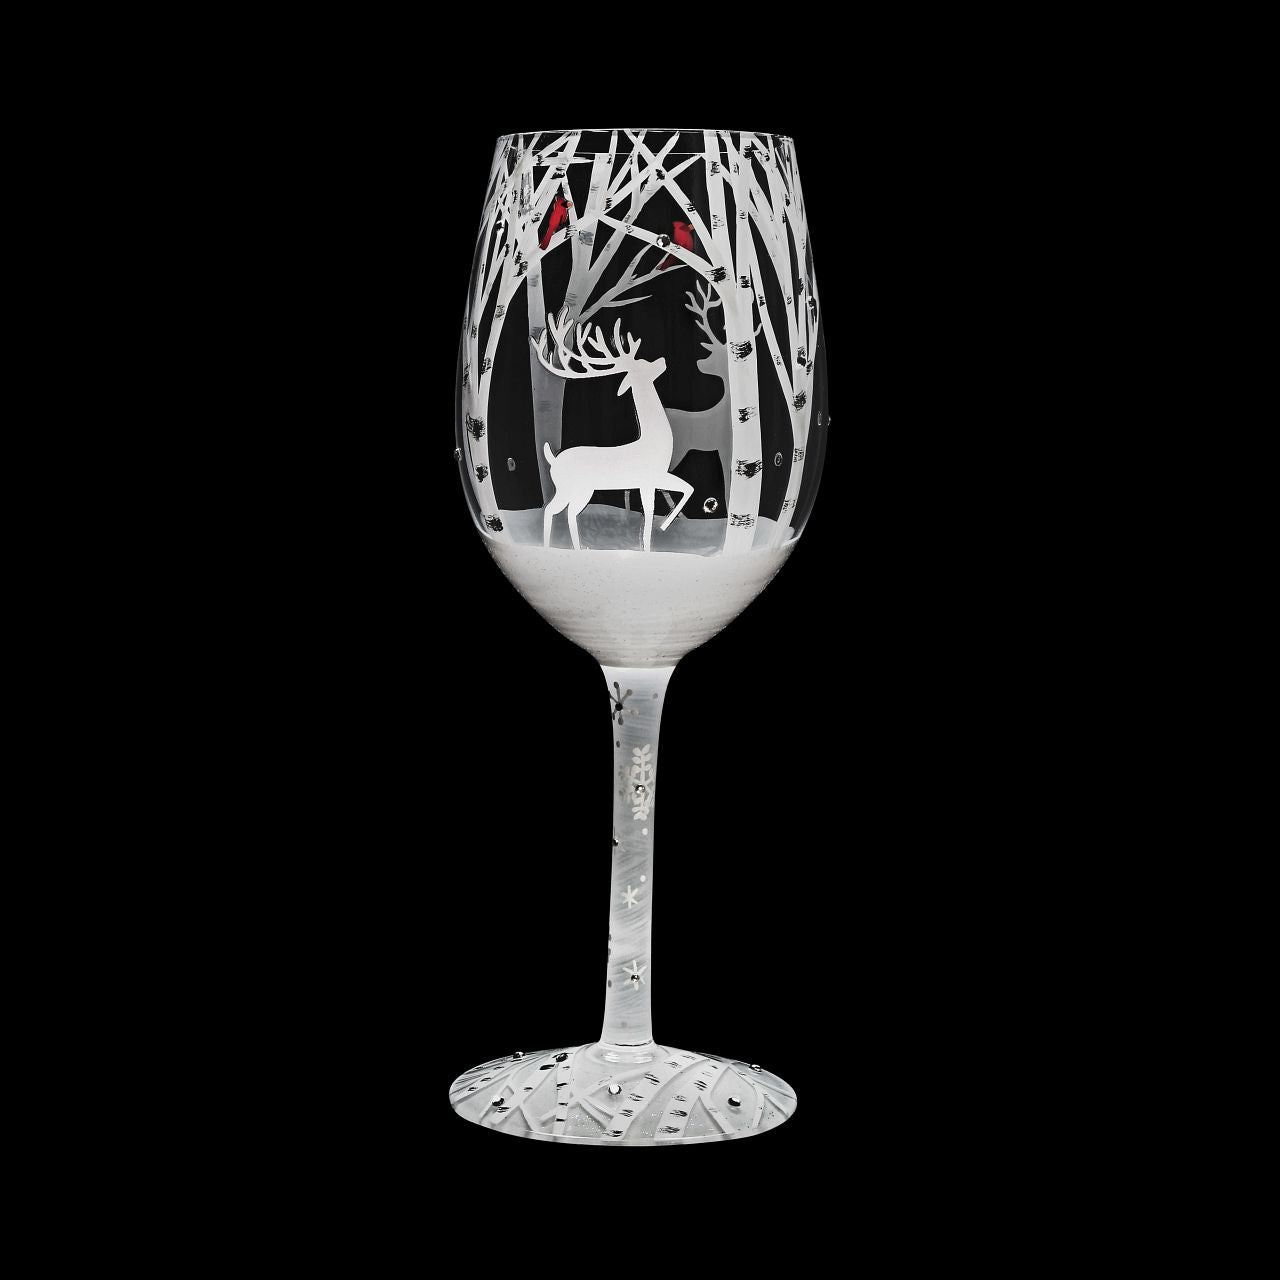 Winter Walk Wine Glass Christmas  Take a Winter Walk with your new favourite wine glass by Lolita. Showing a beautiful white Christmas scene with a bright red cardinal this will be a show stopper at your next Christmas dinner. Adorned with glitter, stones, reindeer and snow this is the perfect holiday glass.